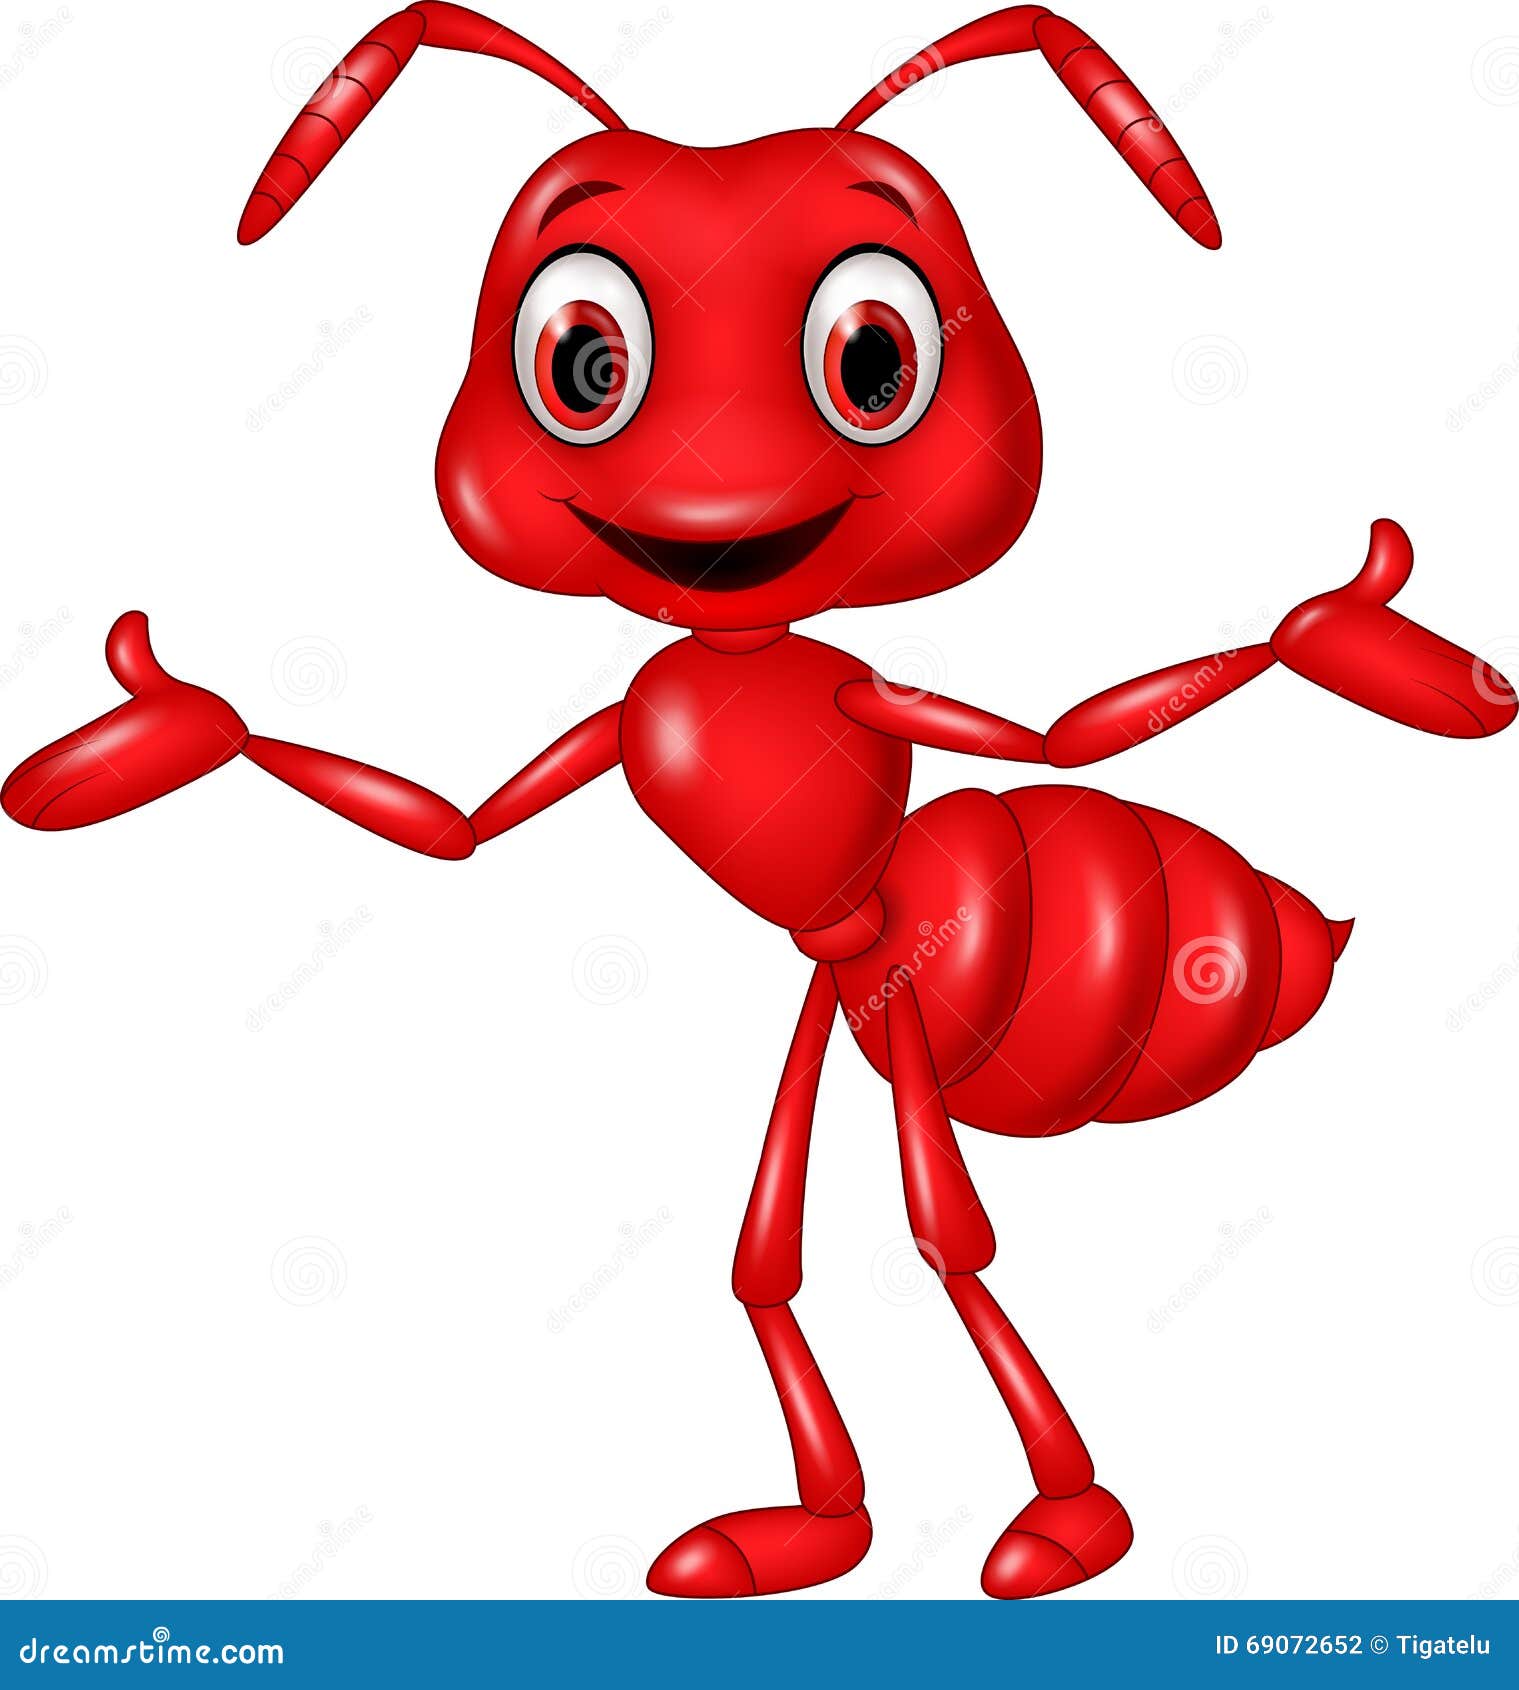 fire ant clipart - photo #33